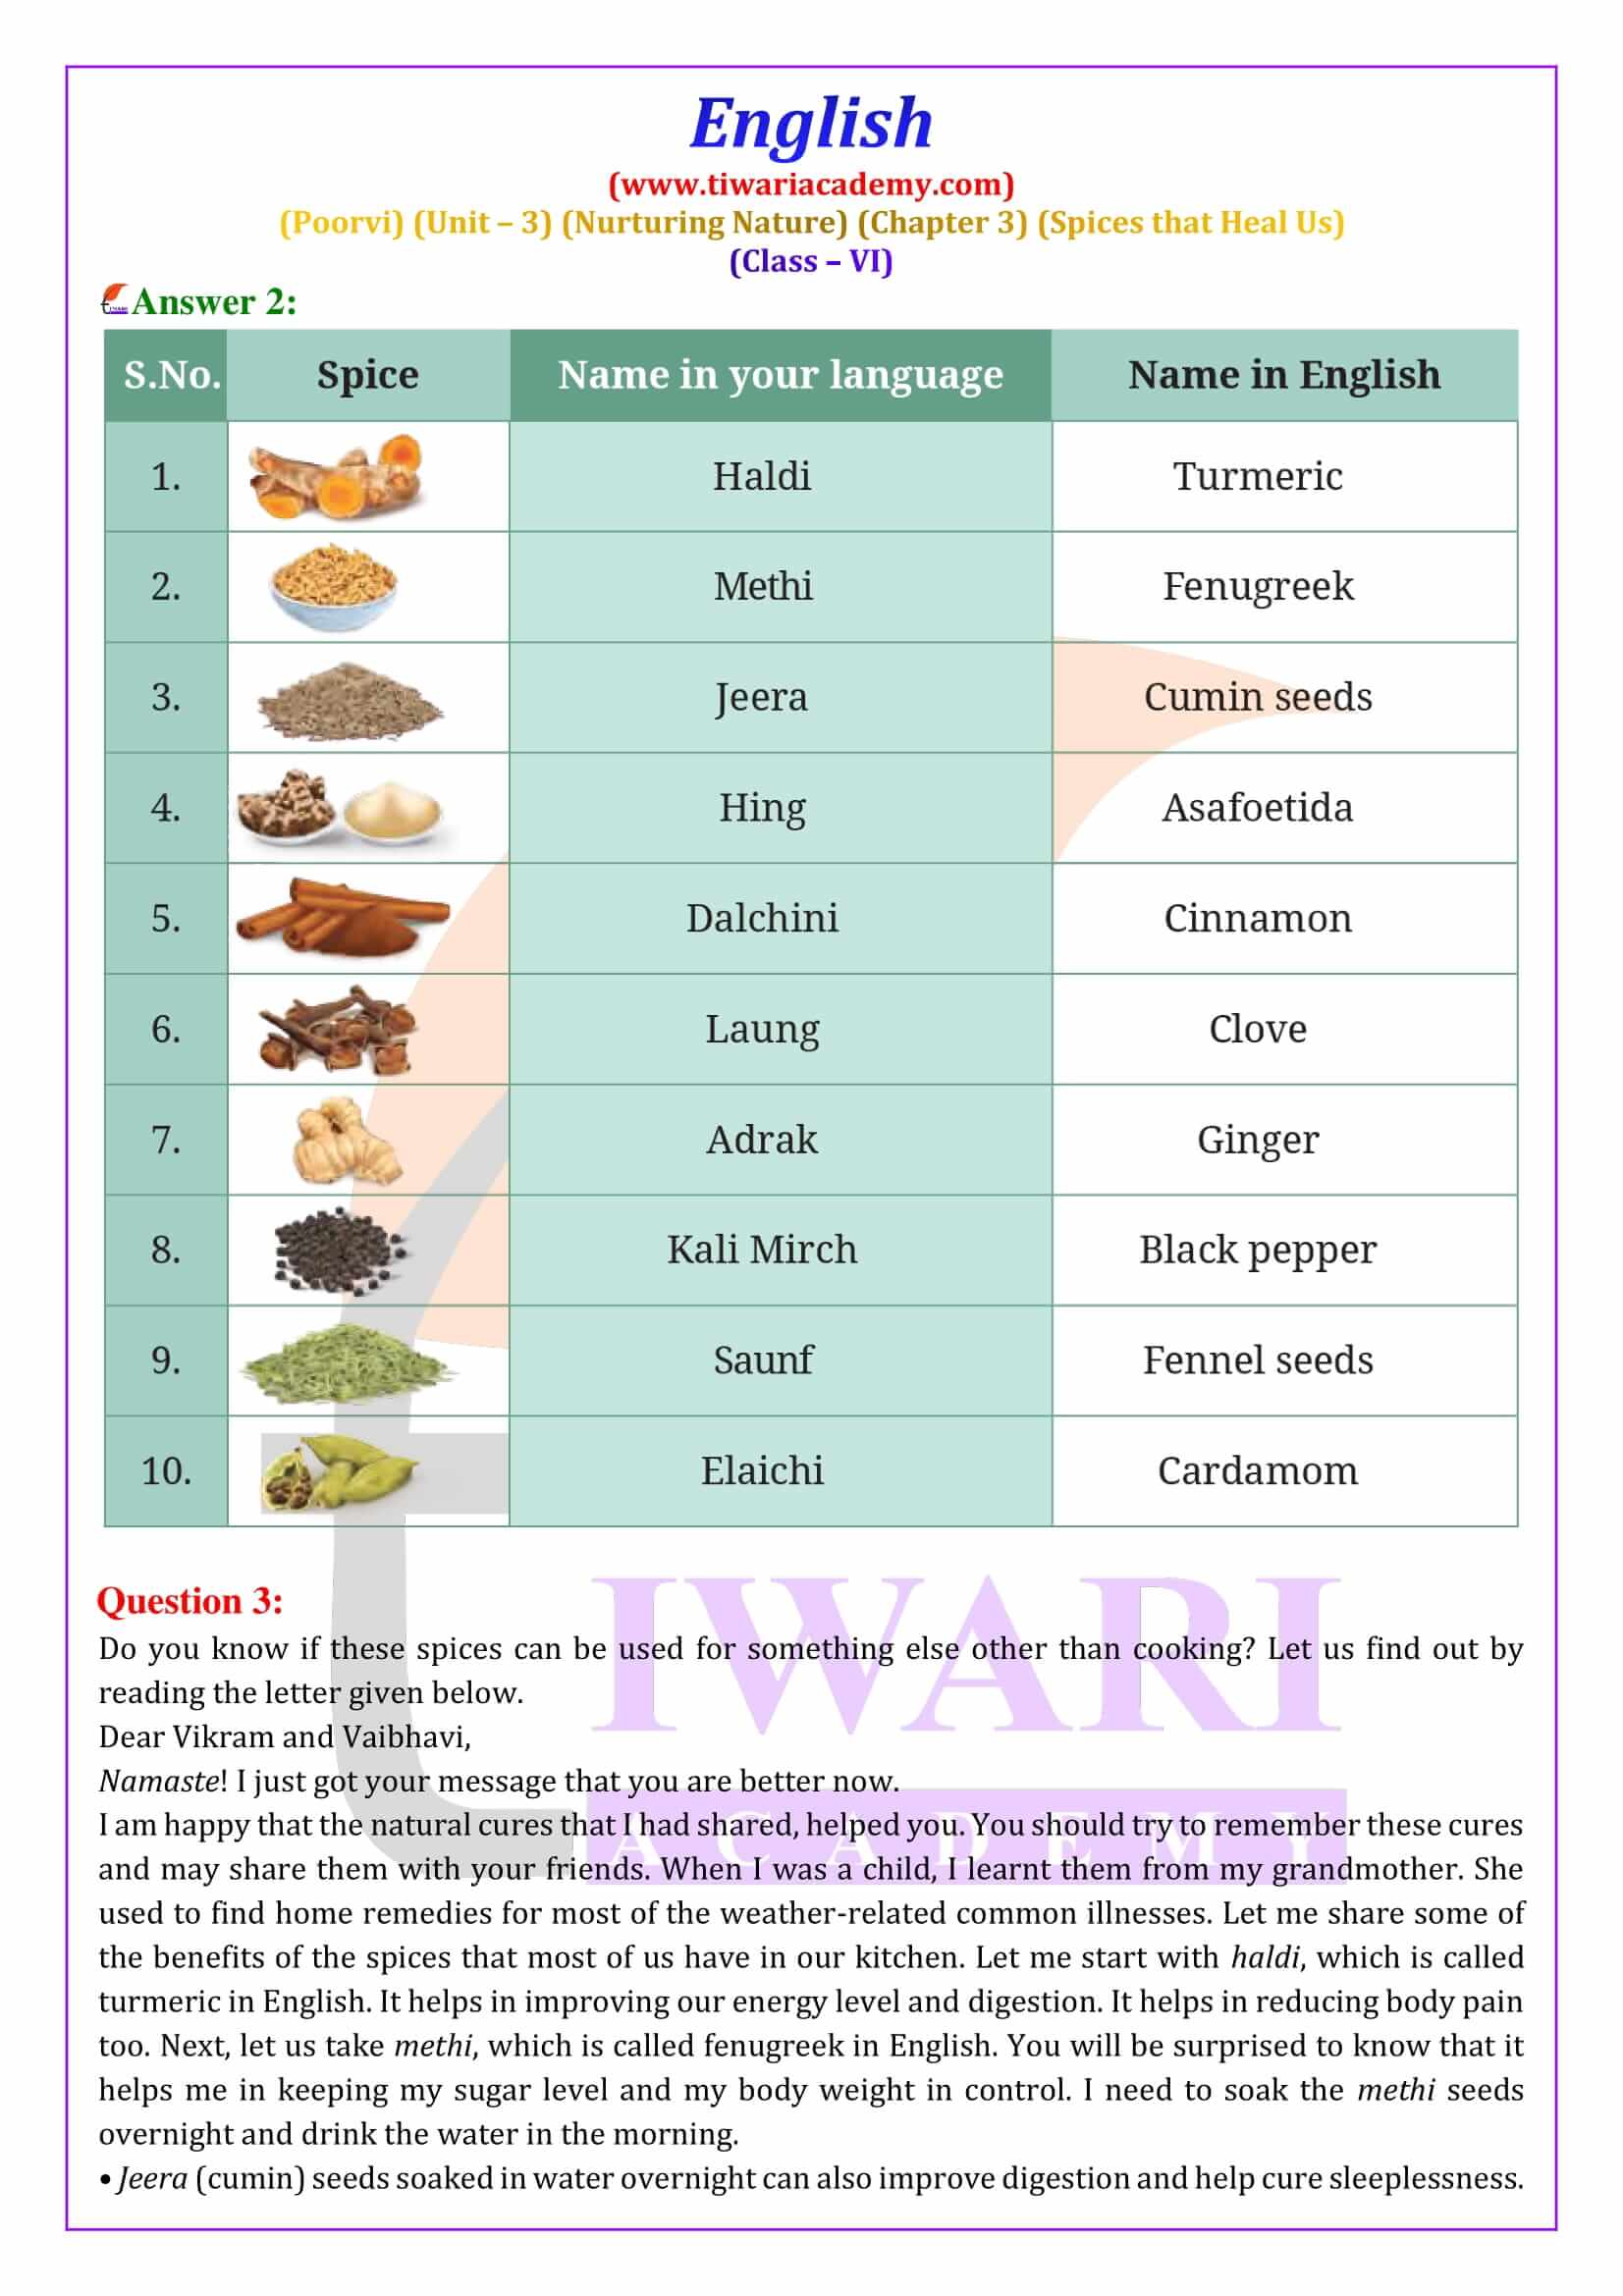 NCERT Class 6 English Poorvi Unit 3 Nurturing Nature Chapter 3 Spices that Heal Us